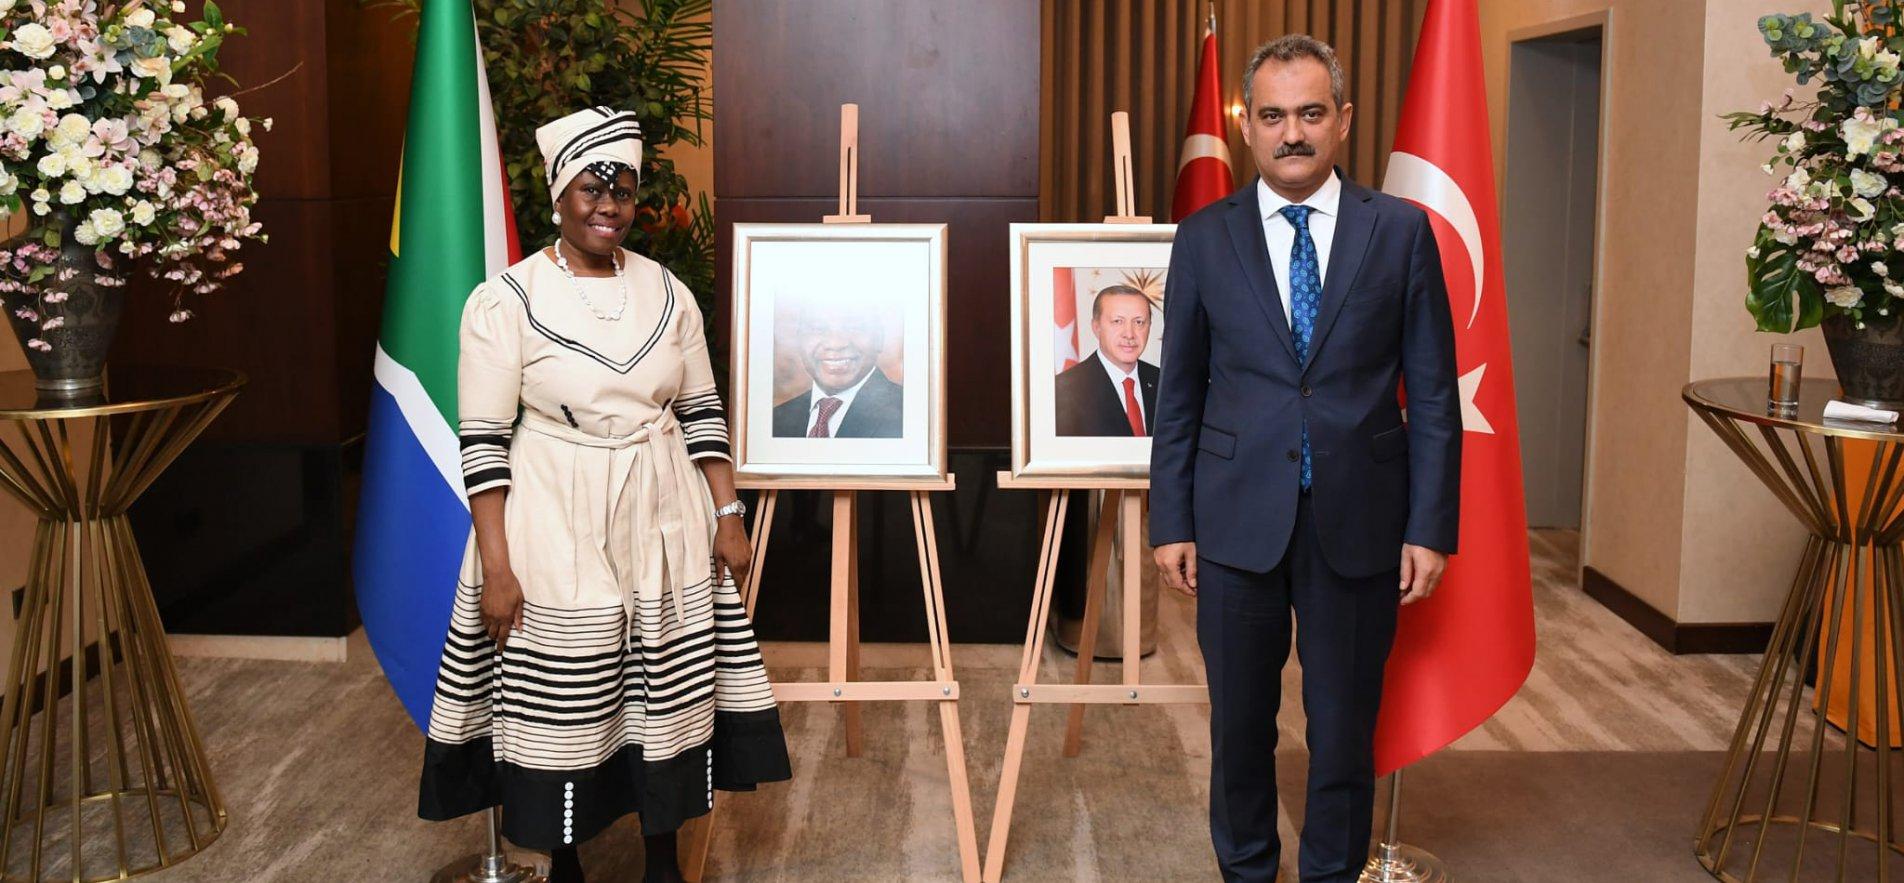 MINISTER ÖZER ATTENDED THE RECEPTION HELD ON THE OCCASION OF THE NATIONAL HERITAGE DAY OF SOUTH AFRICA